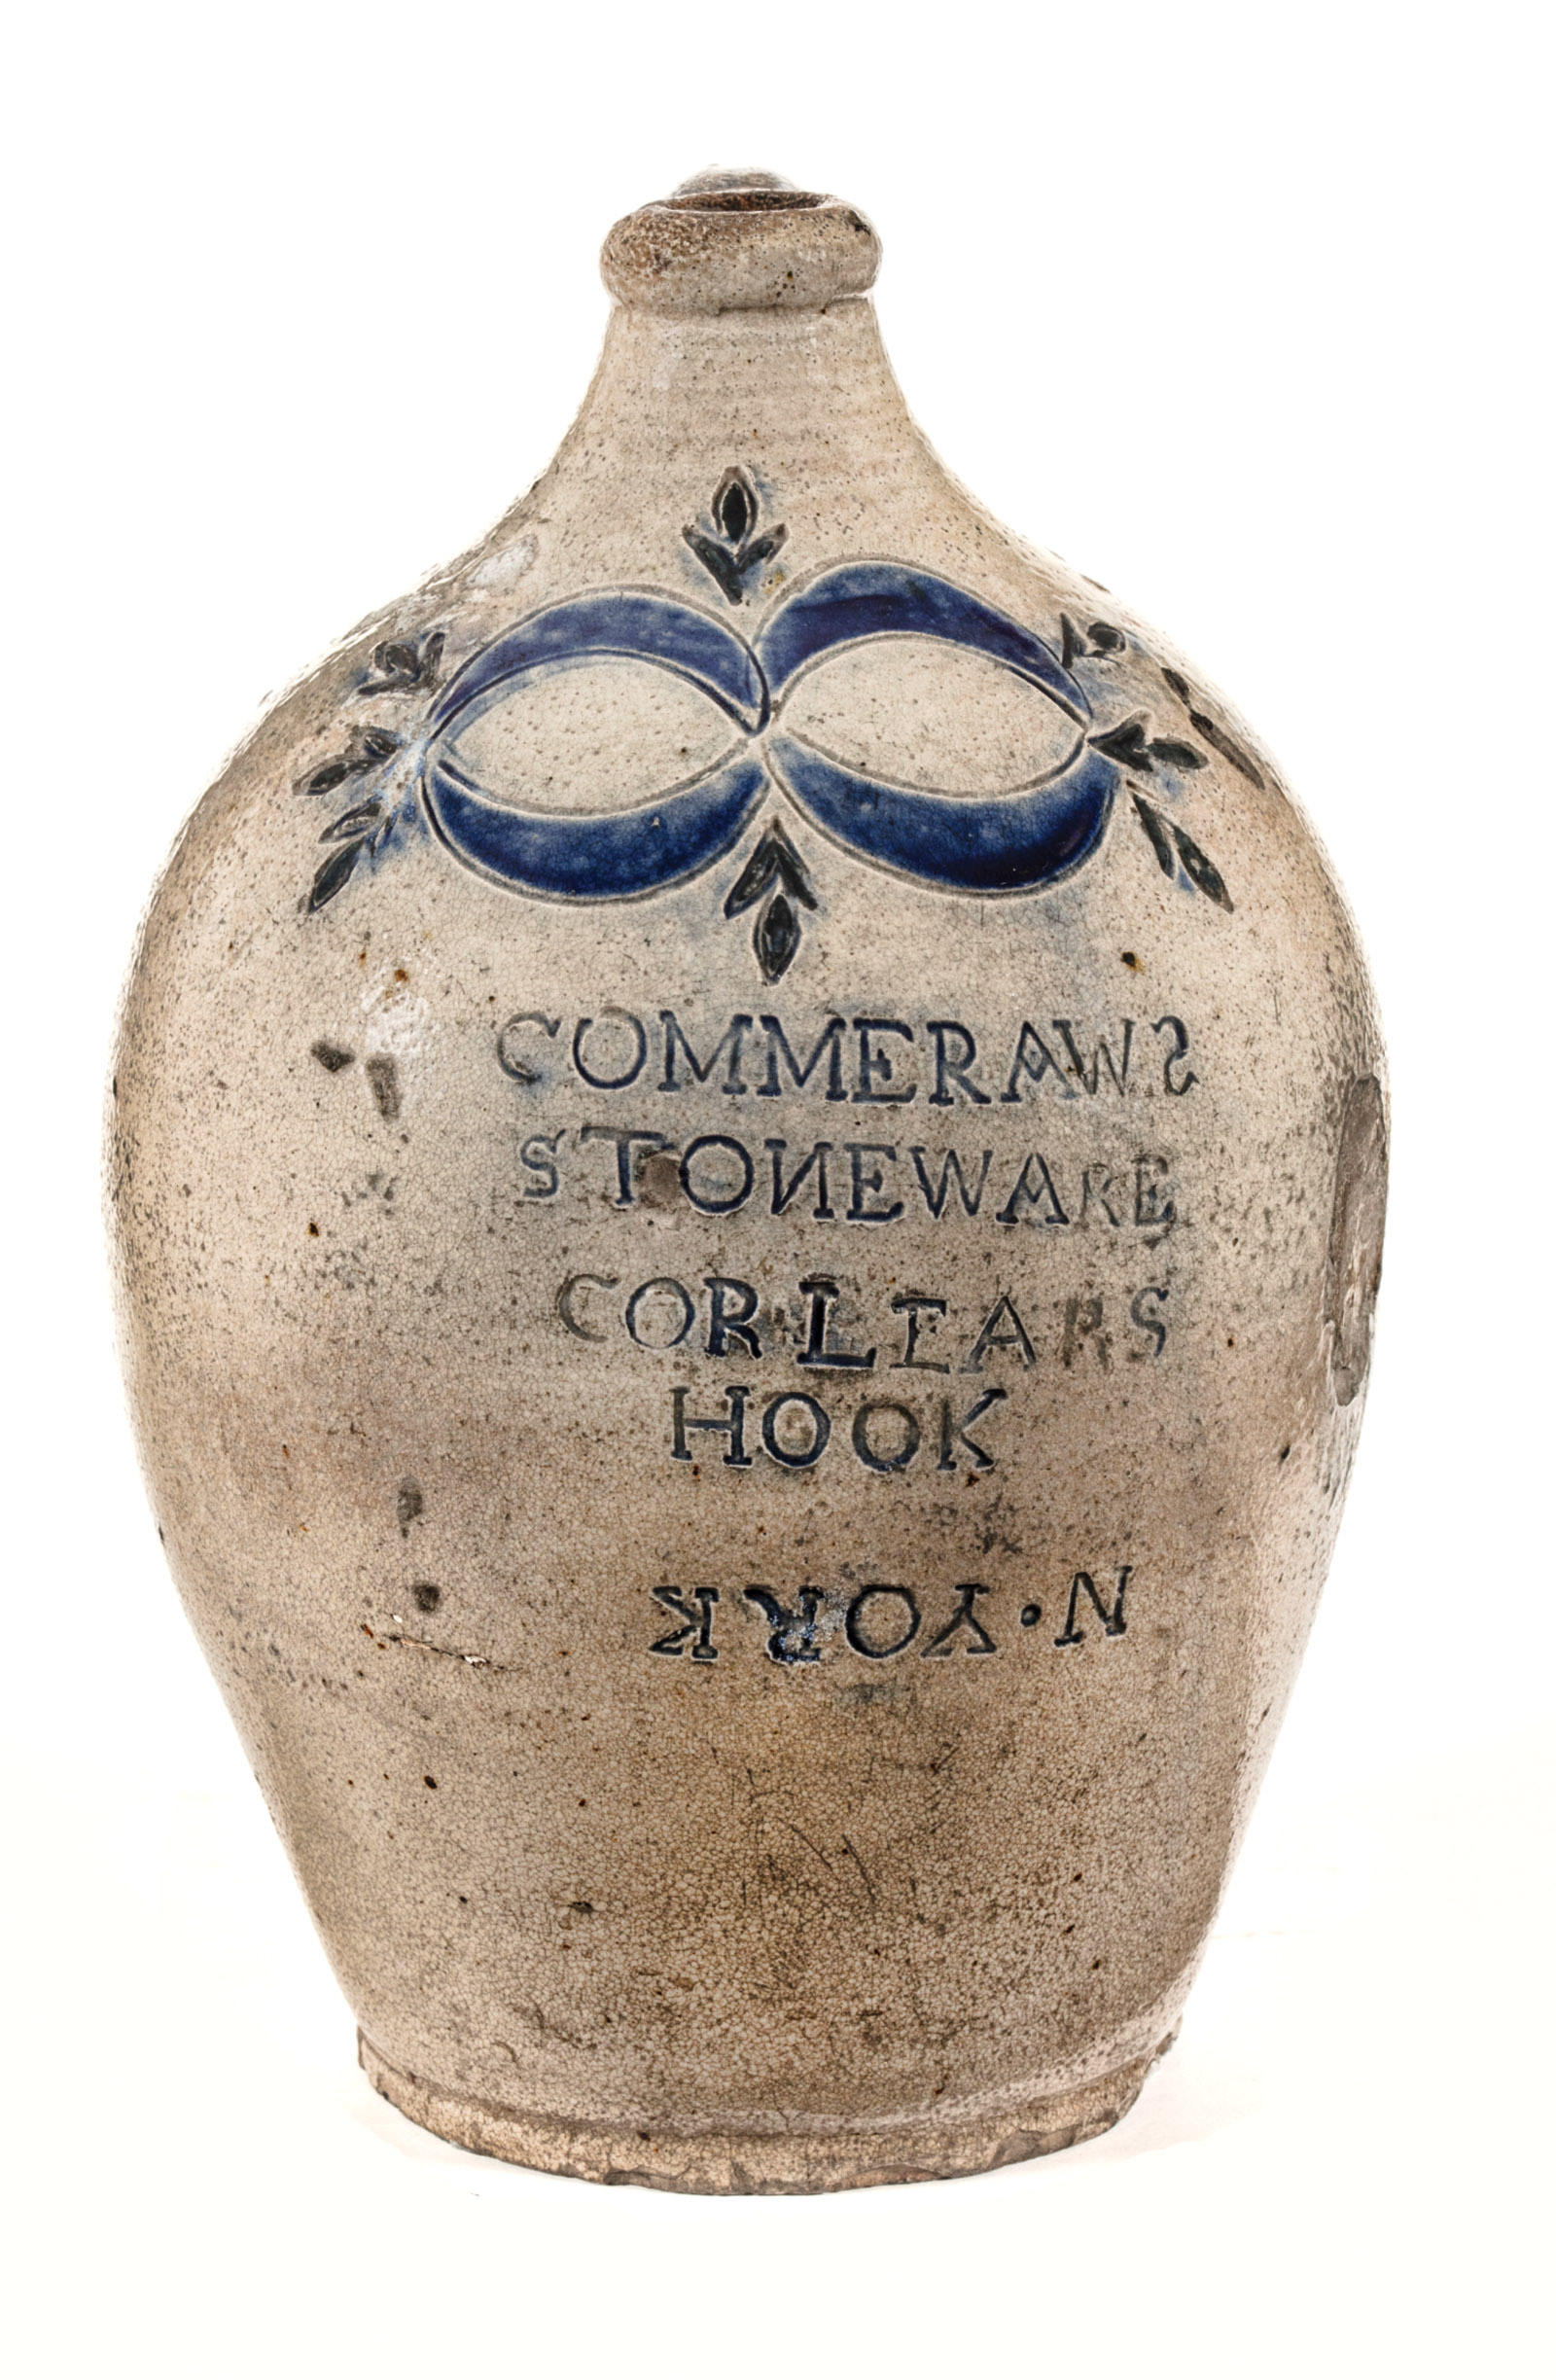 A jug by Thomas Commeraw